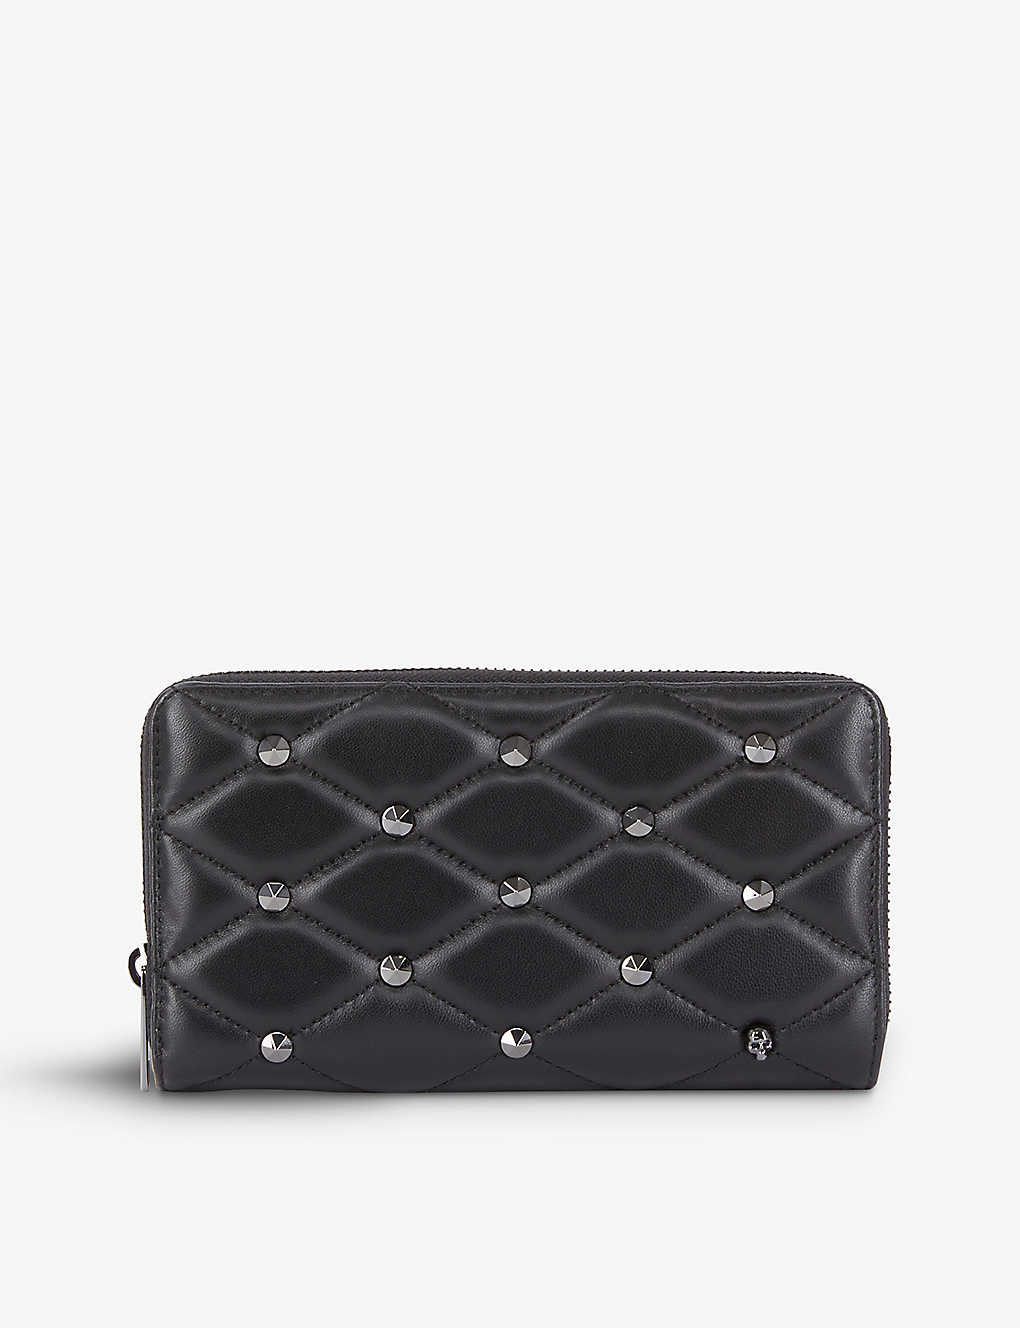 The Kooples Black Studded Quilted Leather Wallet